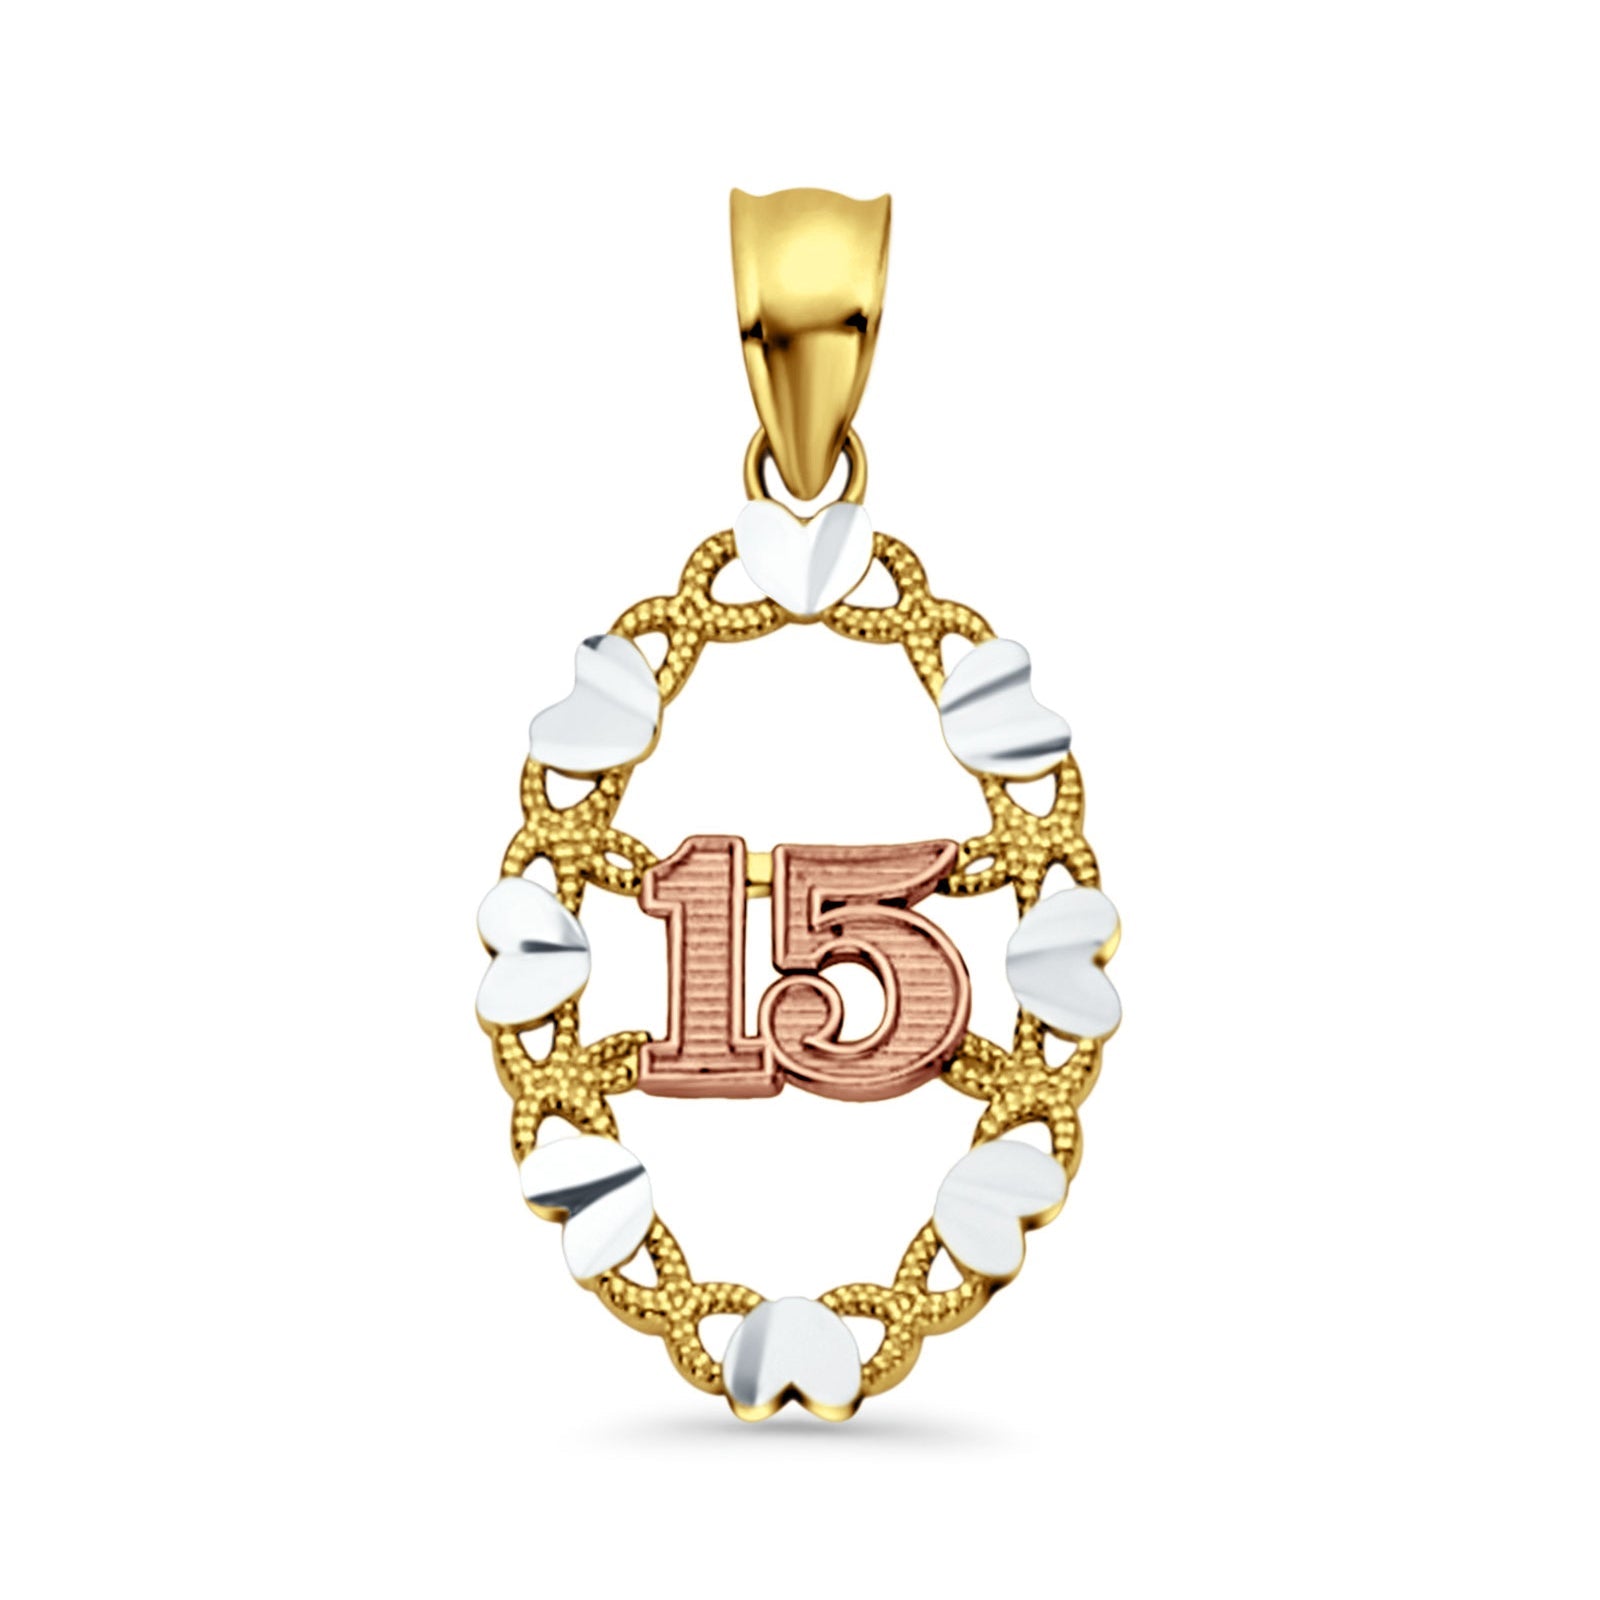 14K Tri Color Gold 15 Years Pendant 26mmX14mm With 16 Inch To 24 Inch 0.8MM Width D.C. Round Wheat Chain Necklace